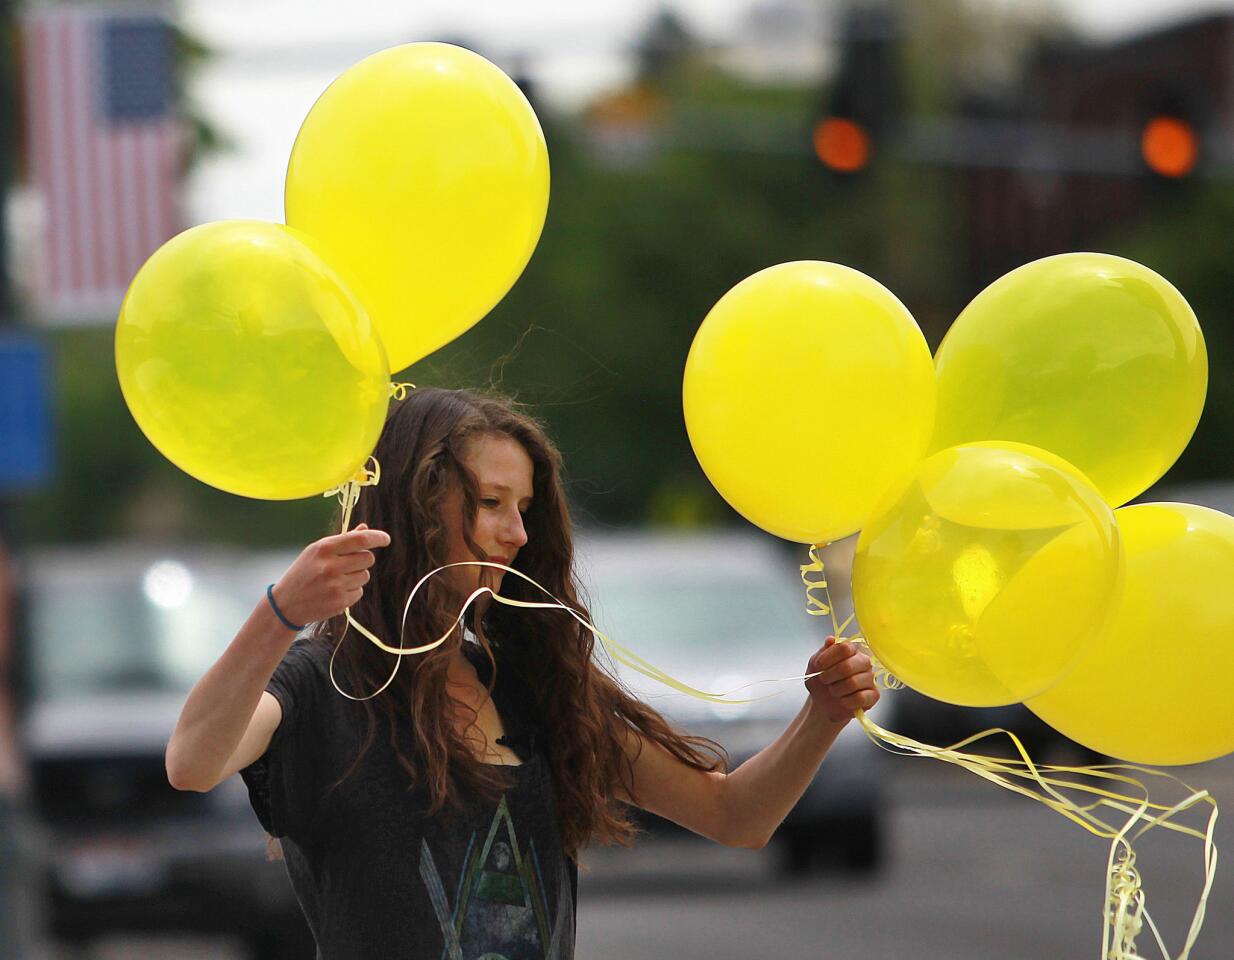 Rachel Malone, 17, ties balloons along Main Street in Hailey, Idaho after the announcement that U.S. Army Sgt. Bowe Bergdahl had been released from captivity.